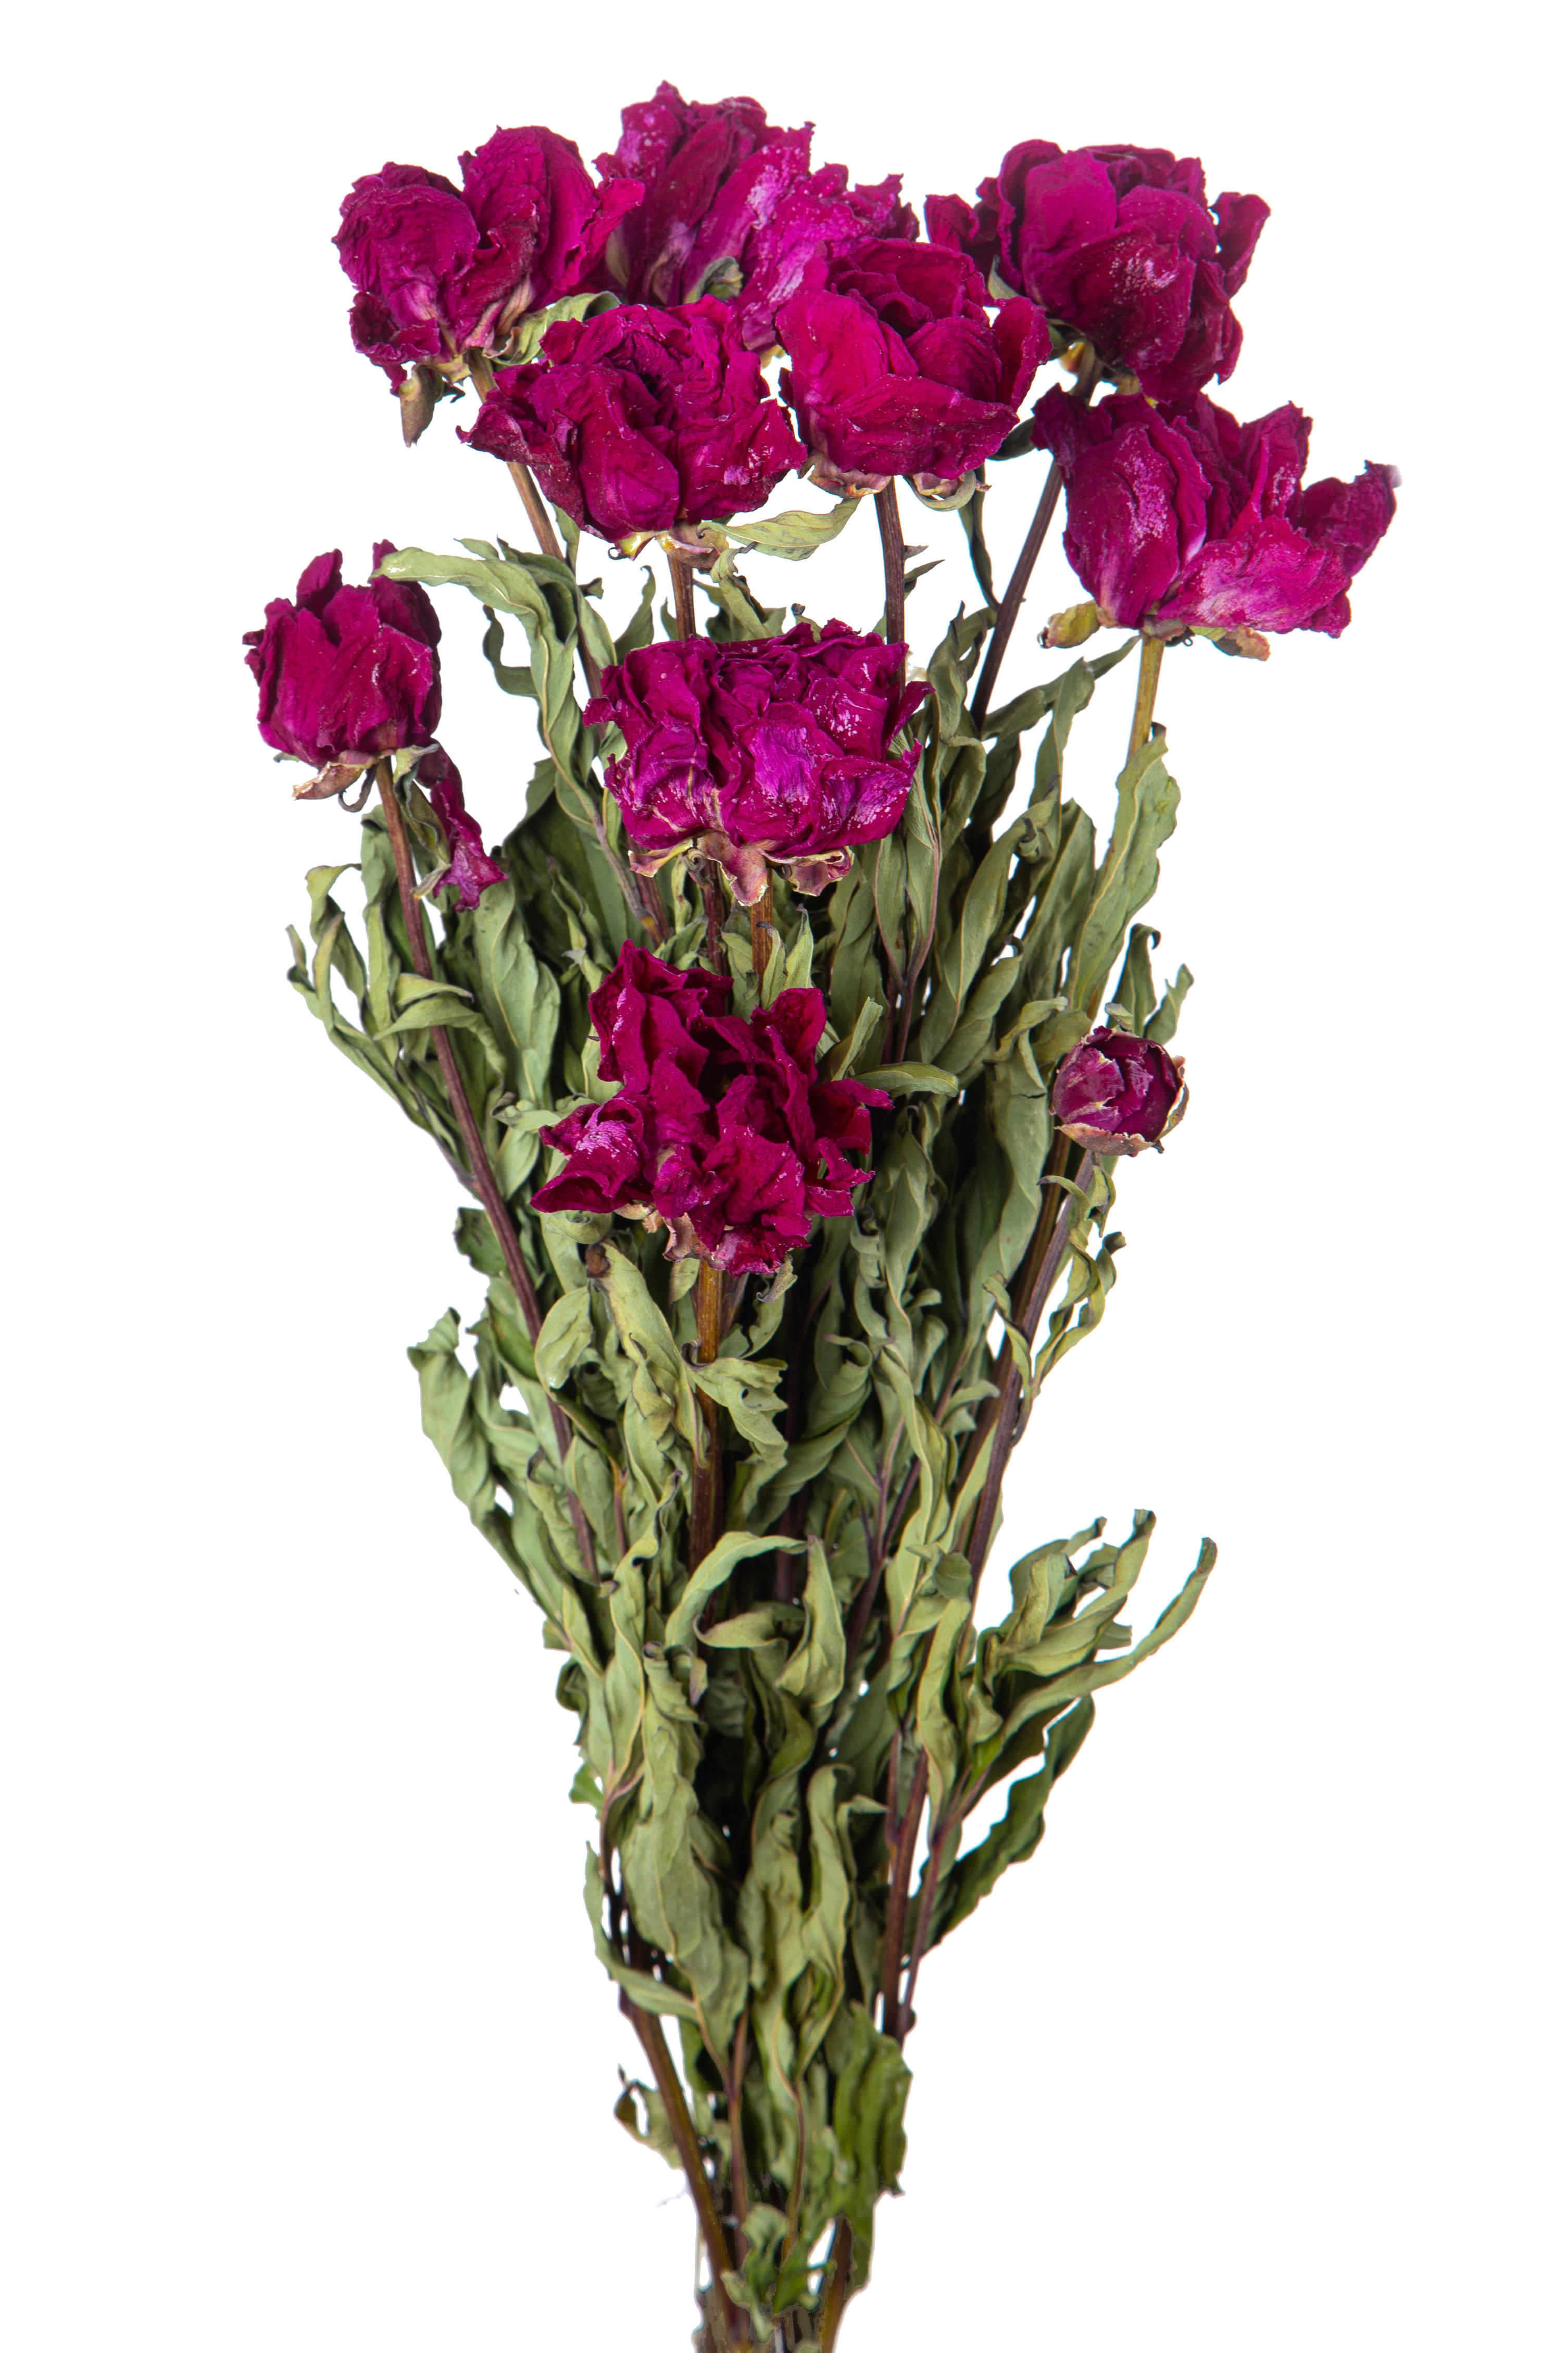 NATURAL PRODUCTS DRIED FLOWERS AND ERBS, FLOWERS, FRUITS AND NATURAL PROTEES, PEONIA NATURALE MAZZO 50 CM